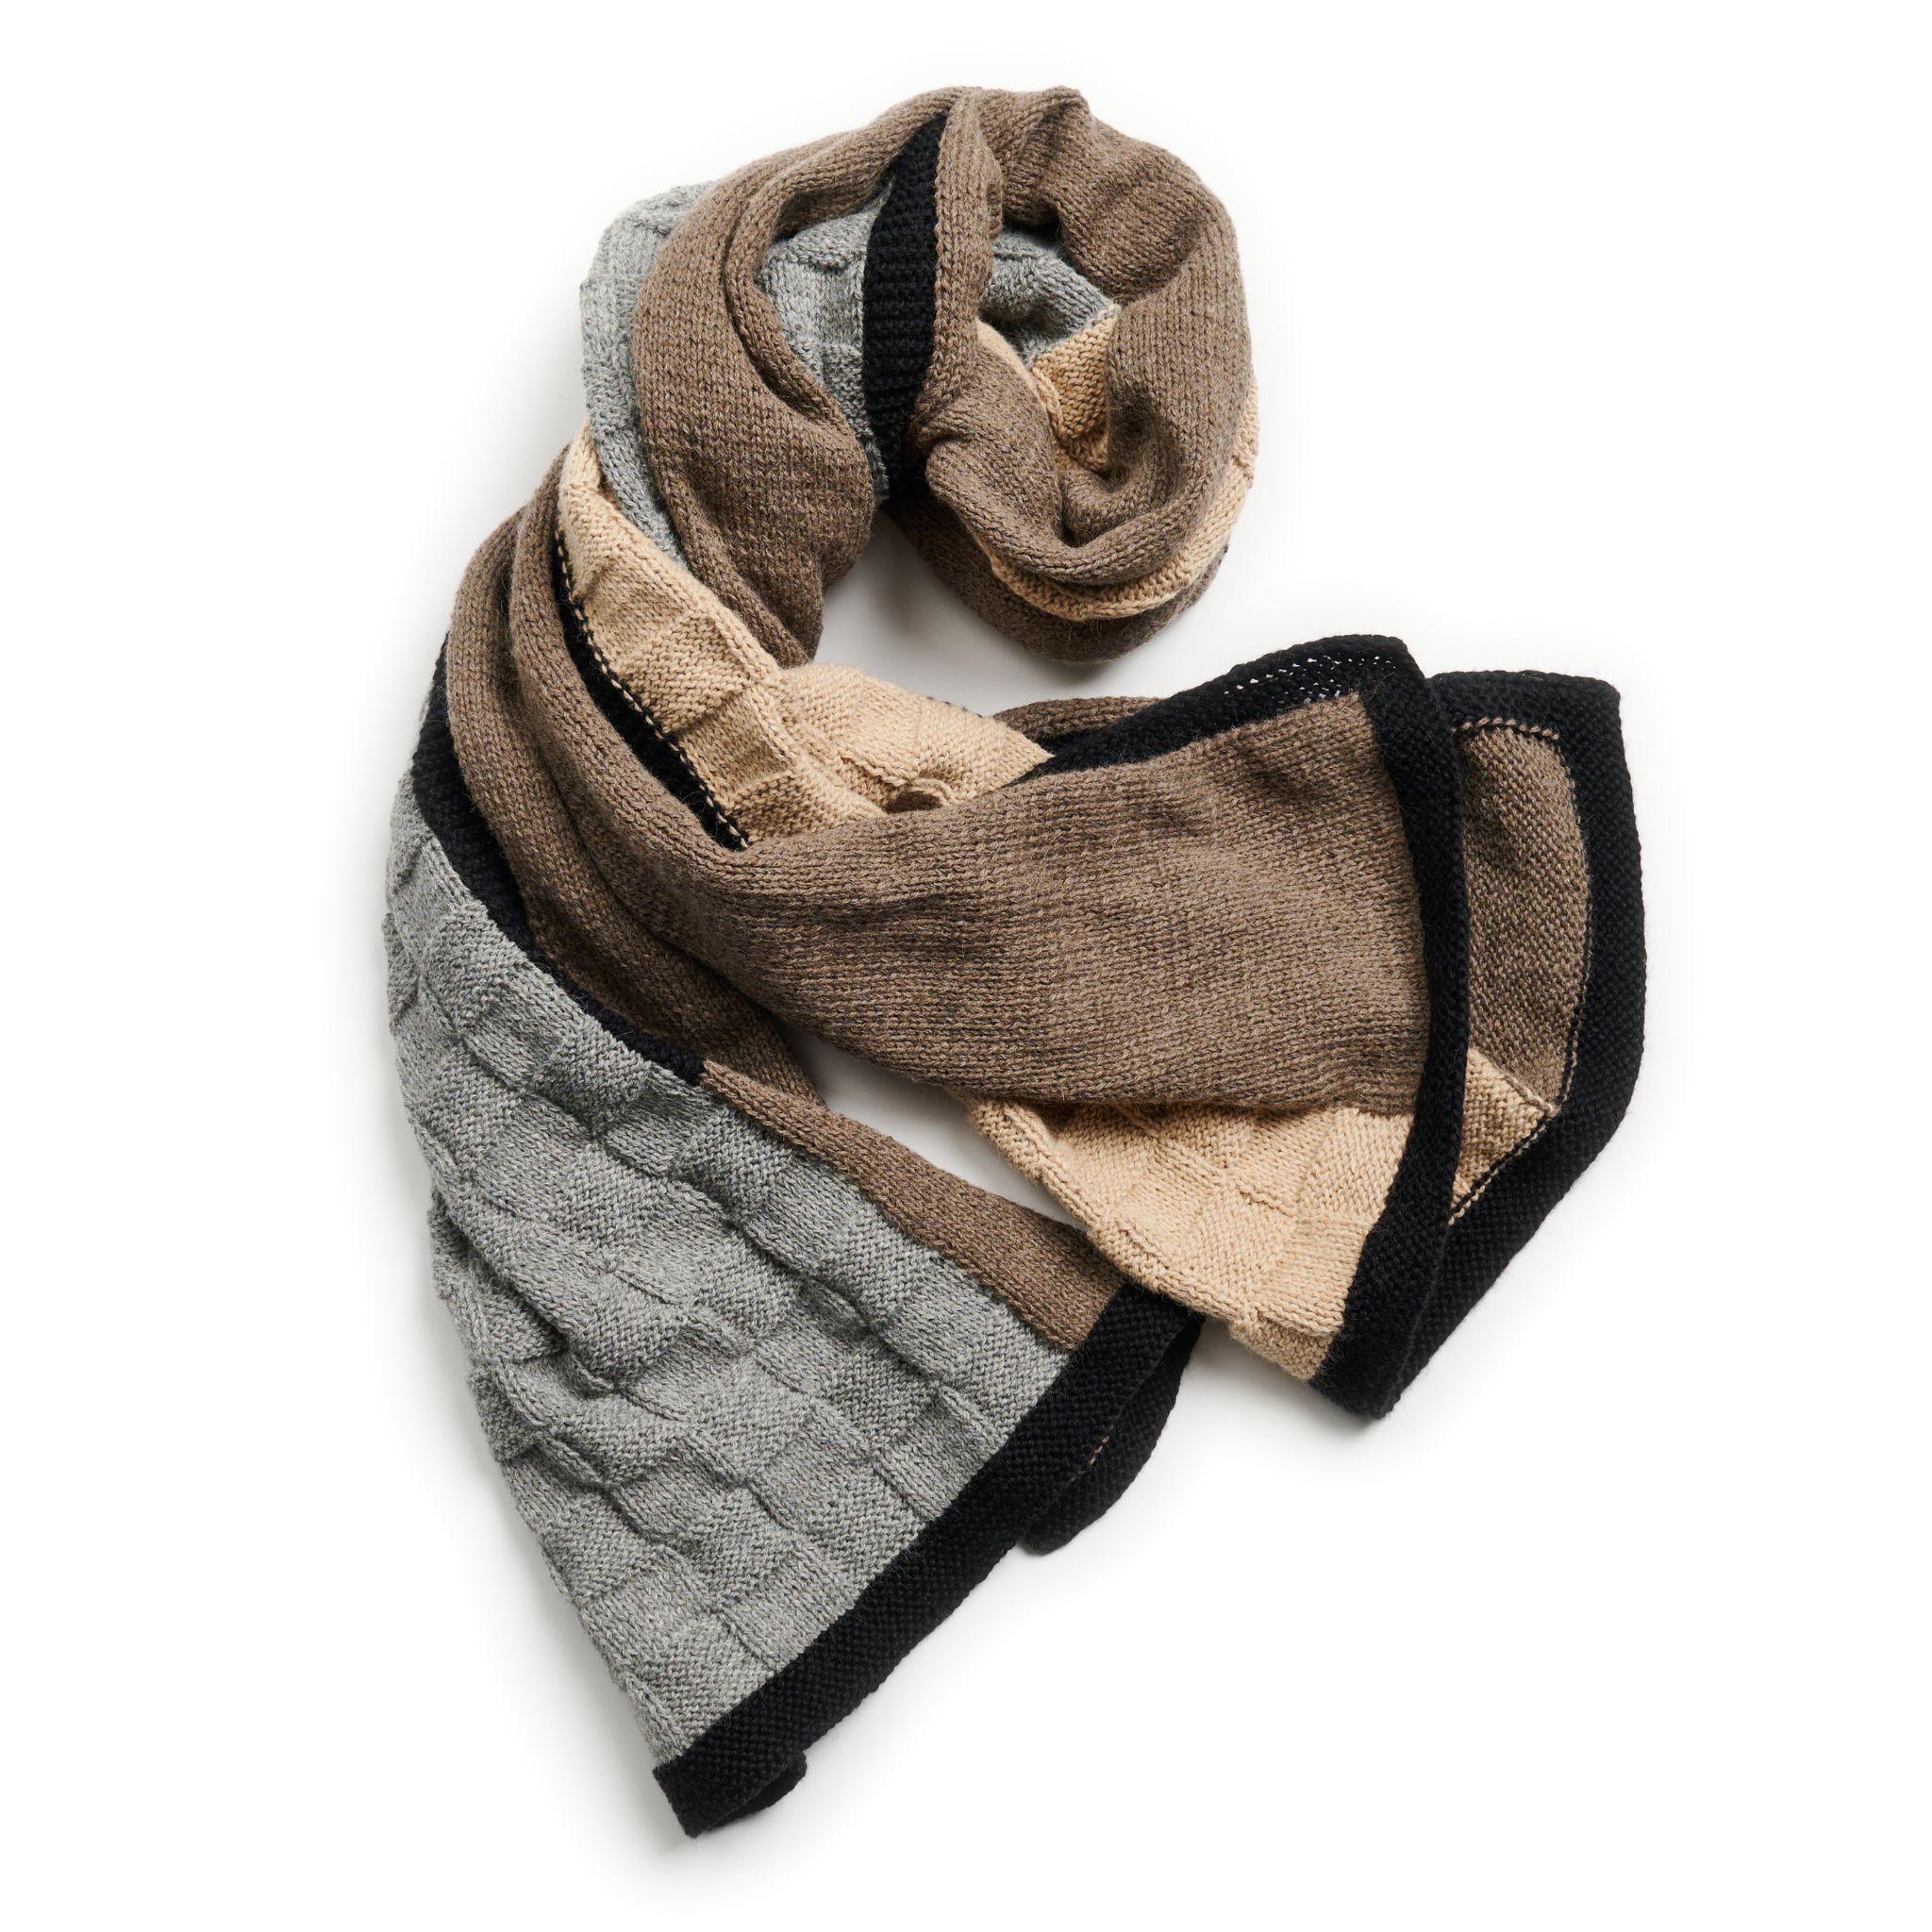 Muhu Brown Gray Pure Alpaca Scarf Hand Knitted In Peru By Women Artisans For Sale 6